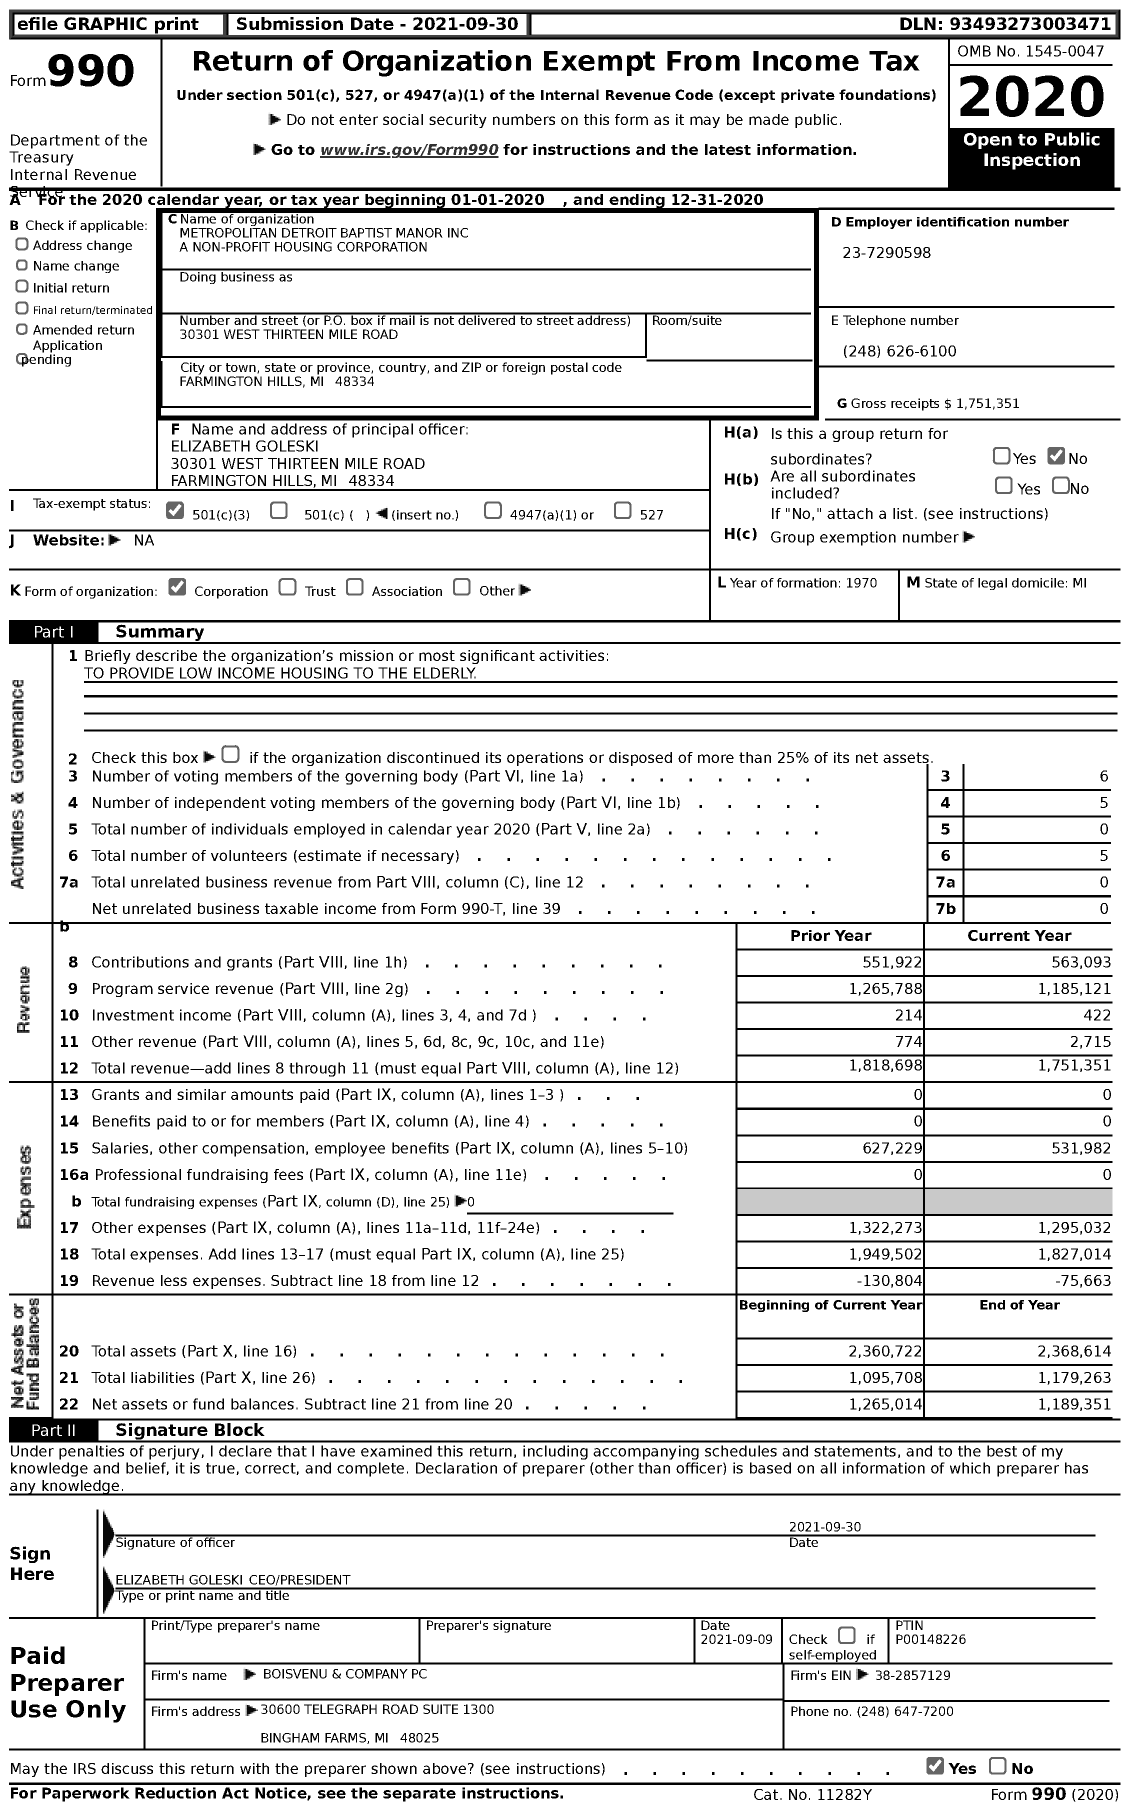 Image of first page of 2020 Form 990 for Metropolitan Detroit Baptist Manor A Non-Profit Housing Corporation